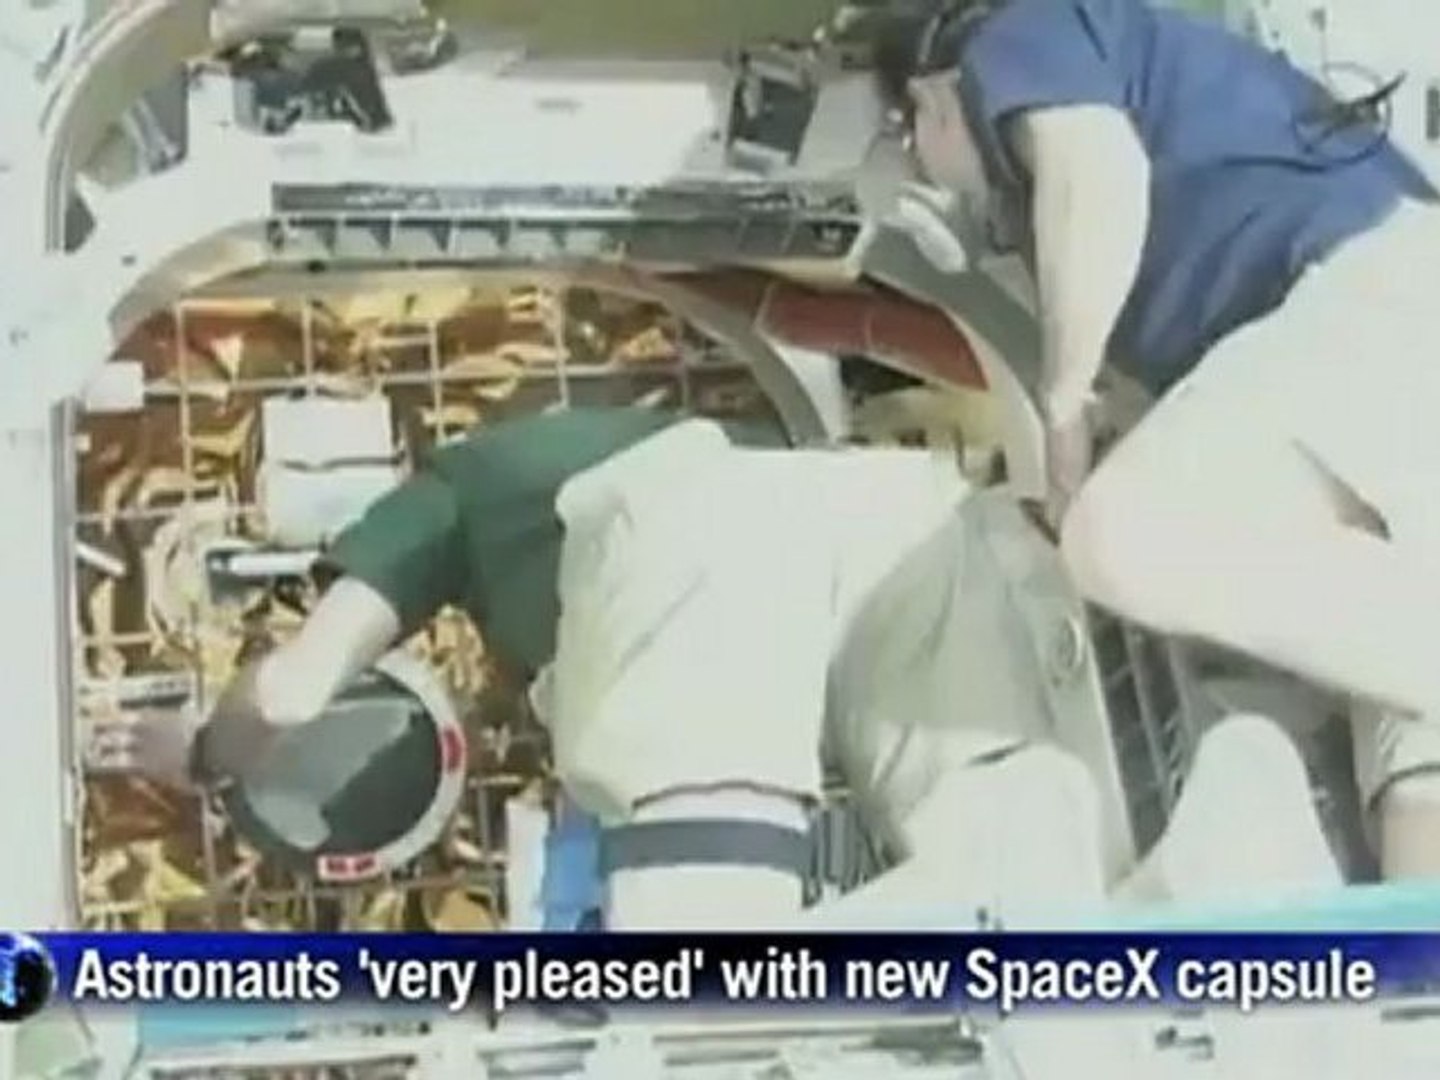 Astronauts 'really pleased' with new SpaceX capsule